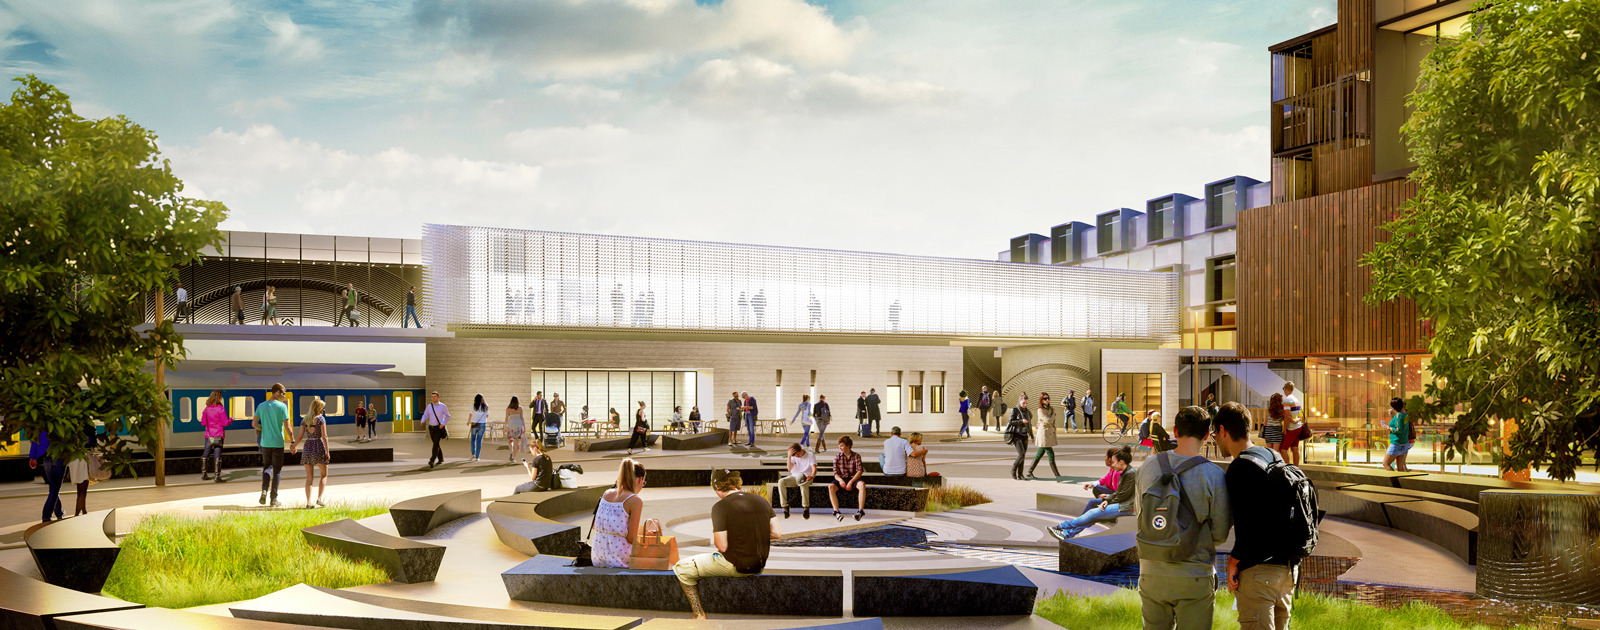 Artist’s impression of the public seating area outside the new train station.